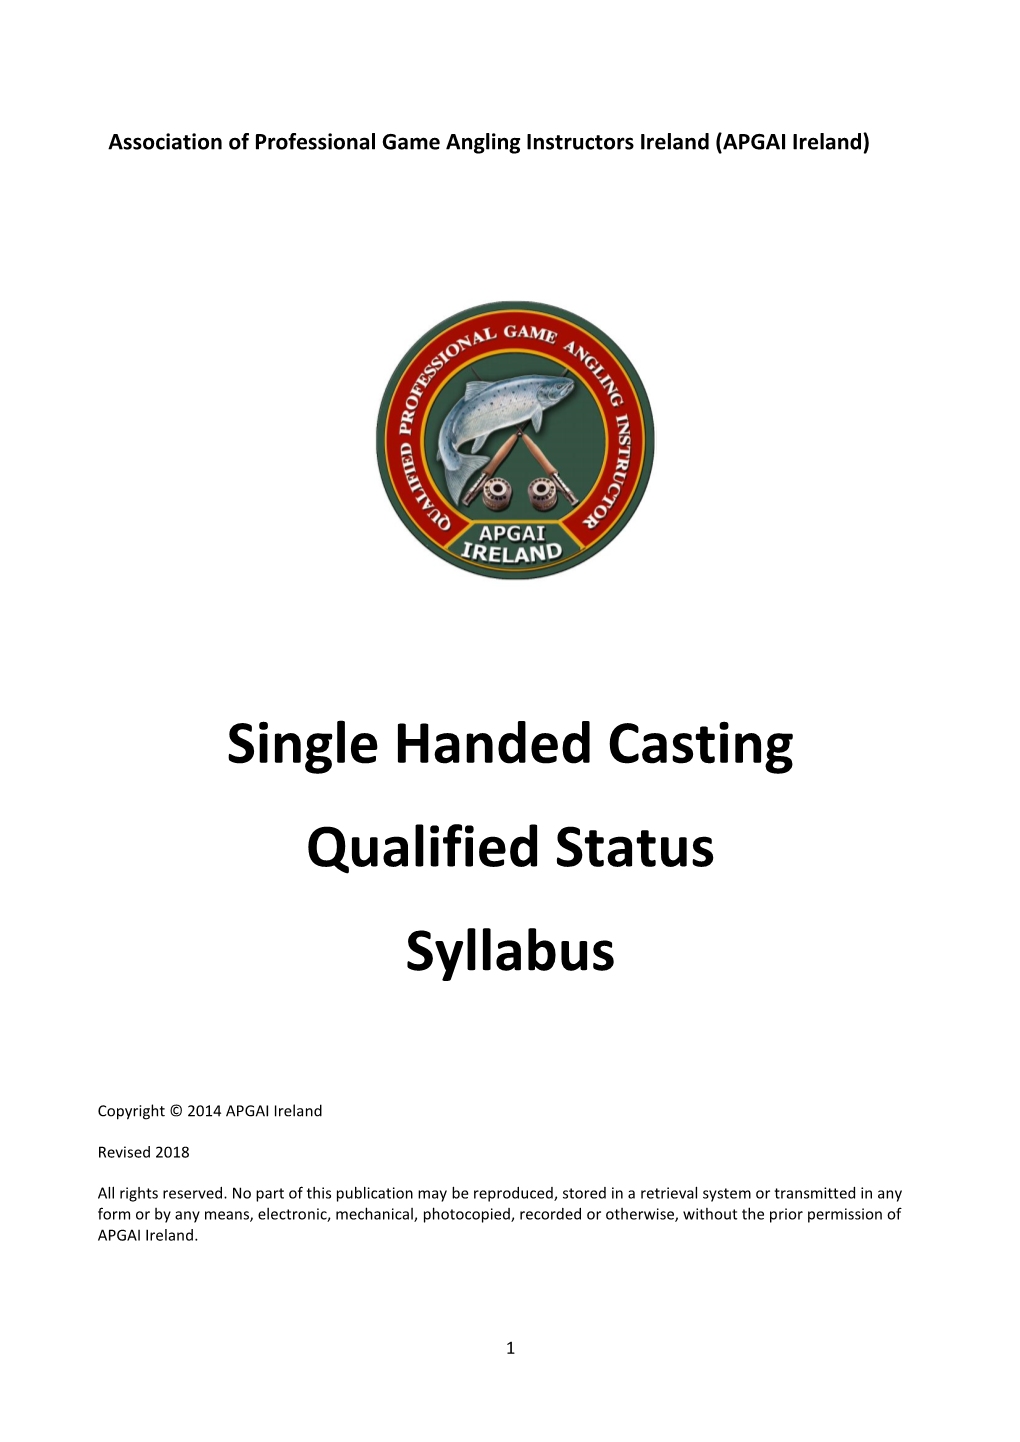 Single Handed Casting Qualified Status Syllabus